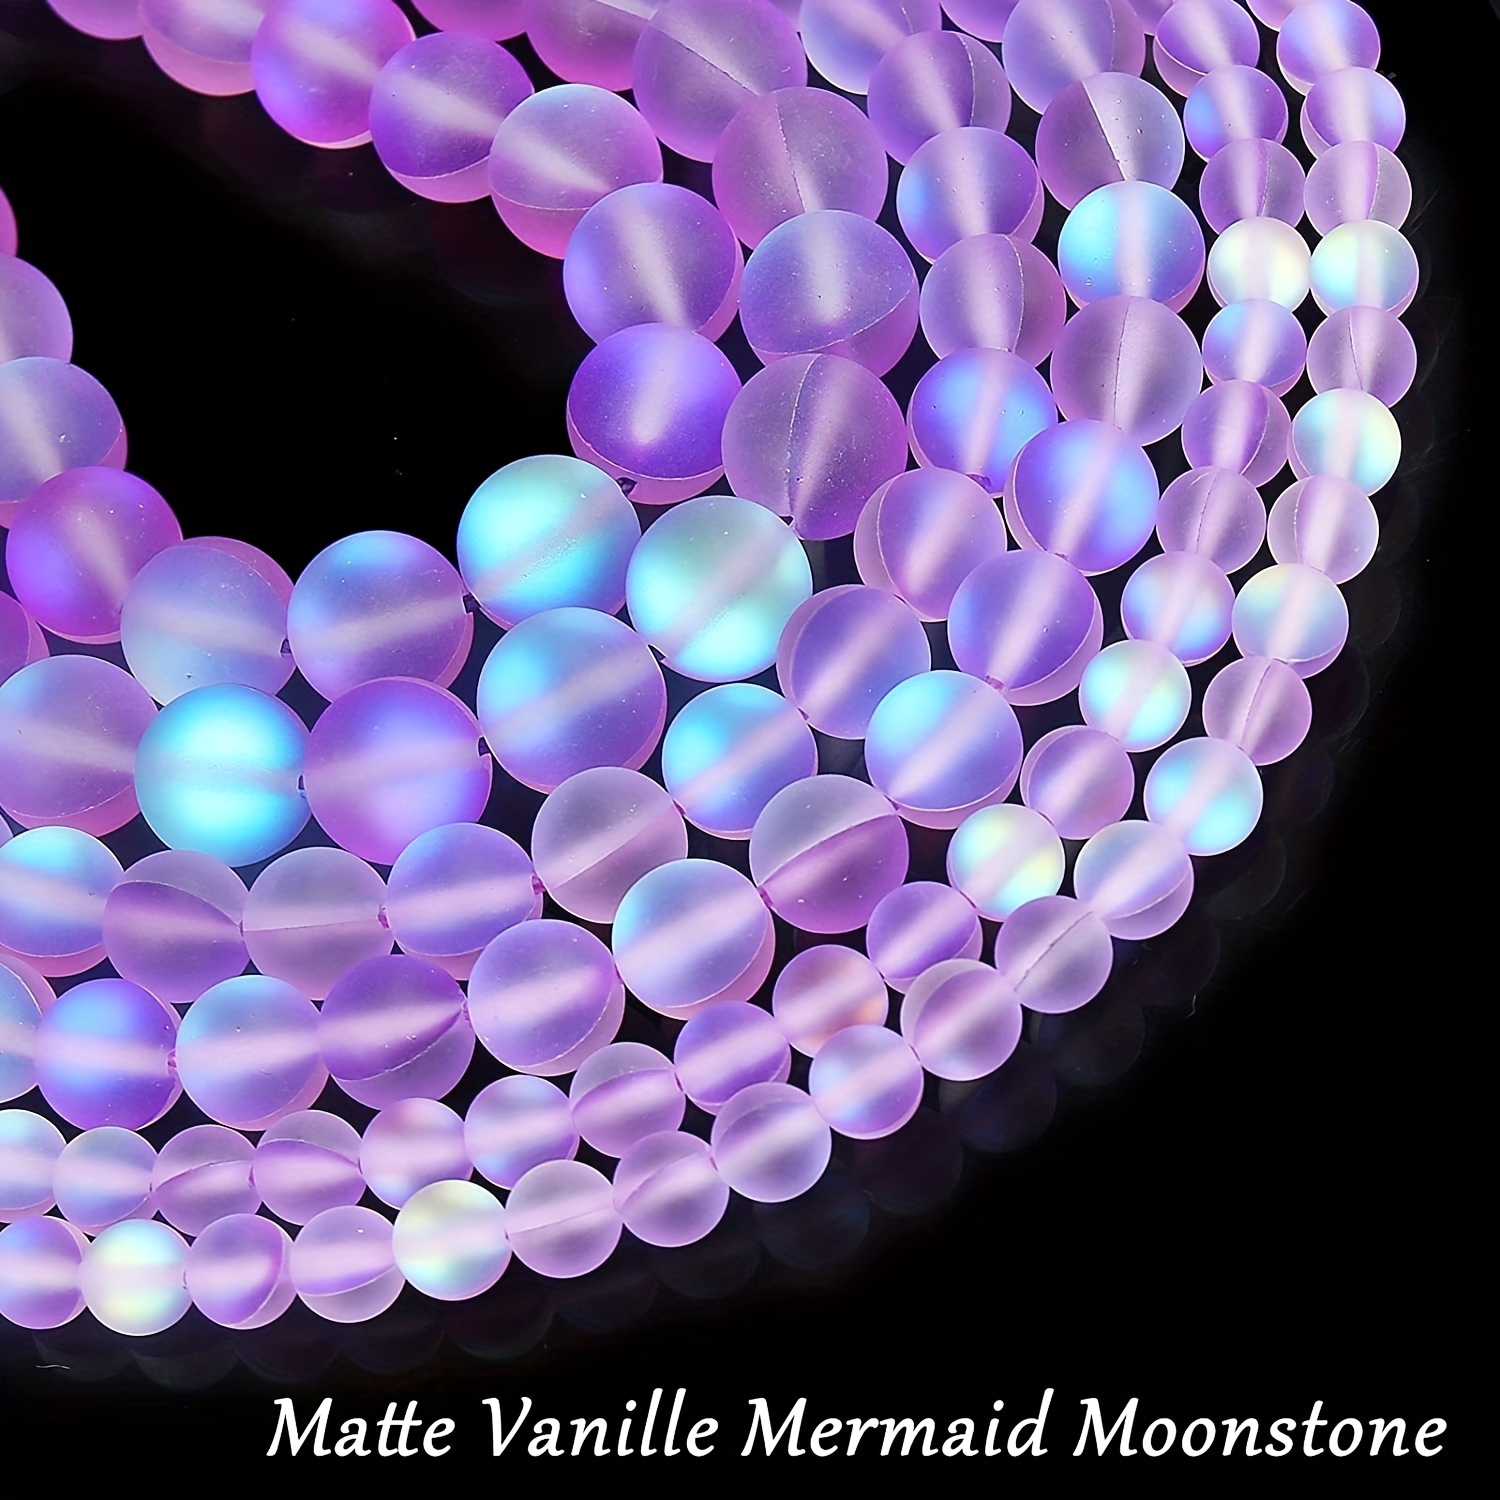 Mermaid Beads Synthetic Moonstone 12mm Red